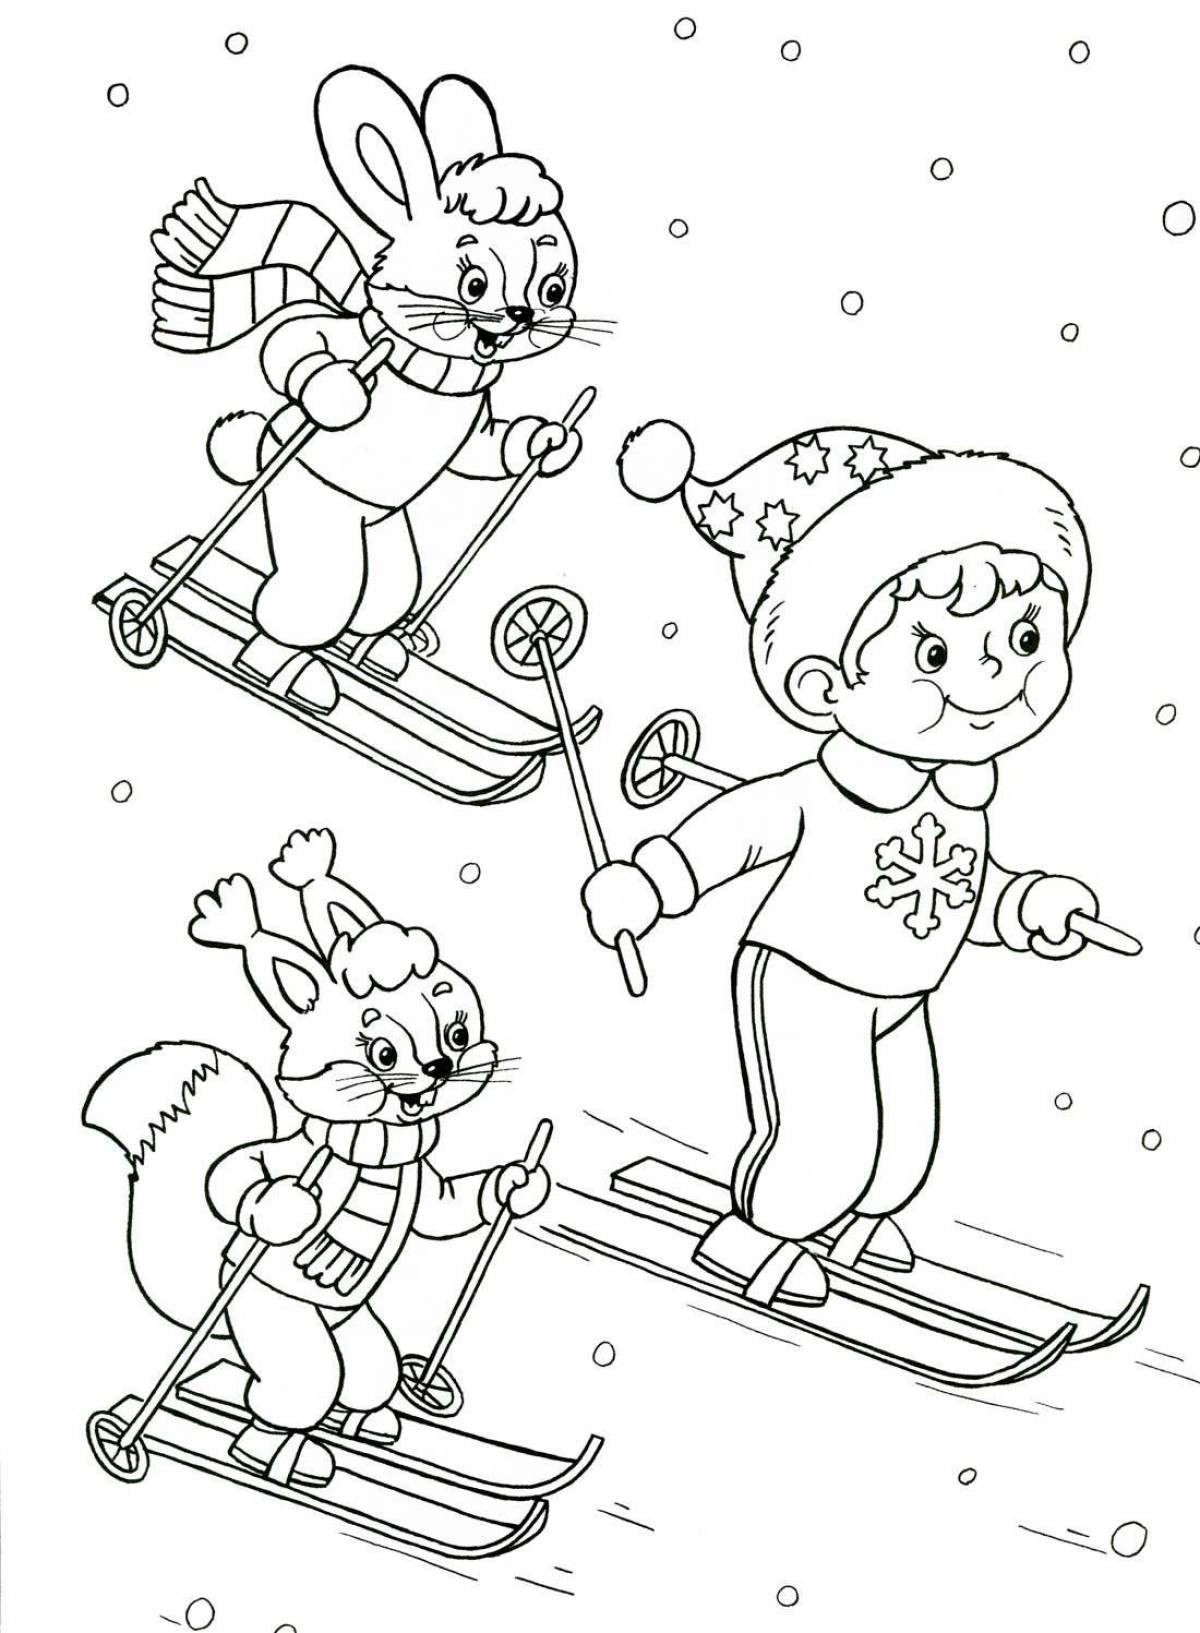 For children 3 4 years old winter sports #2